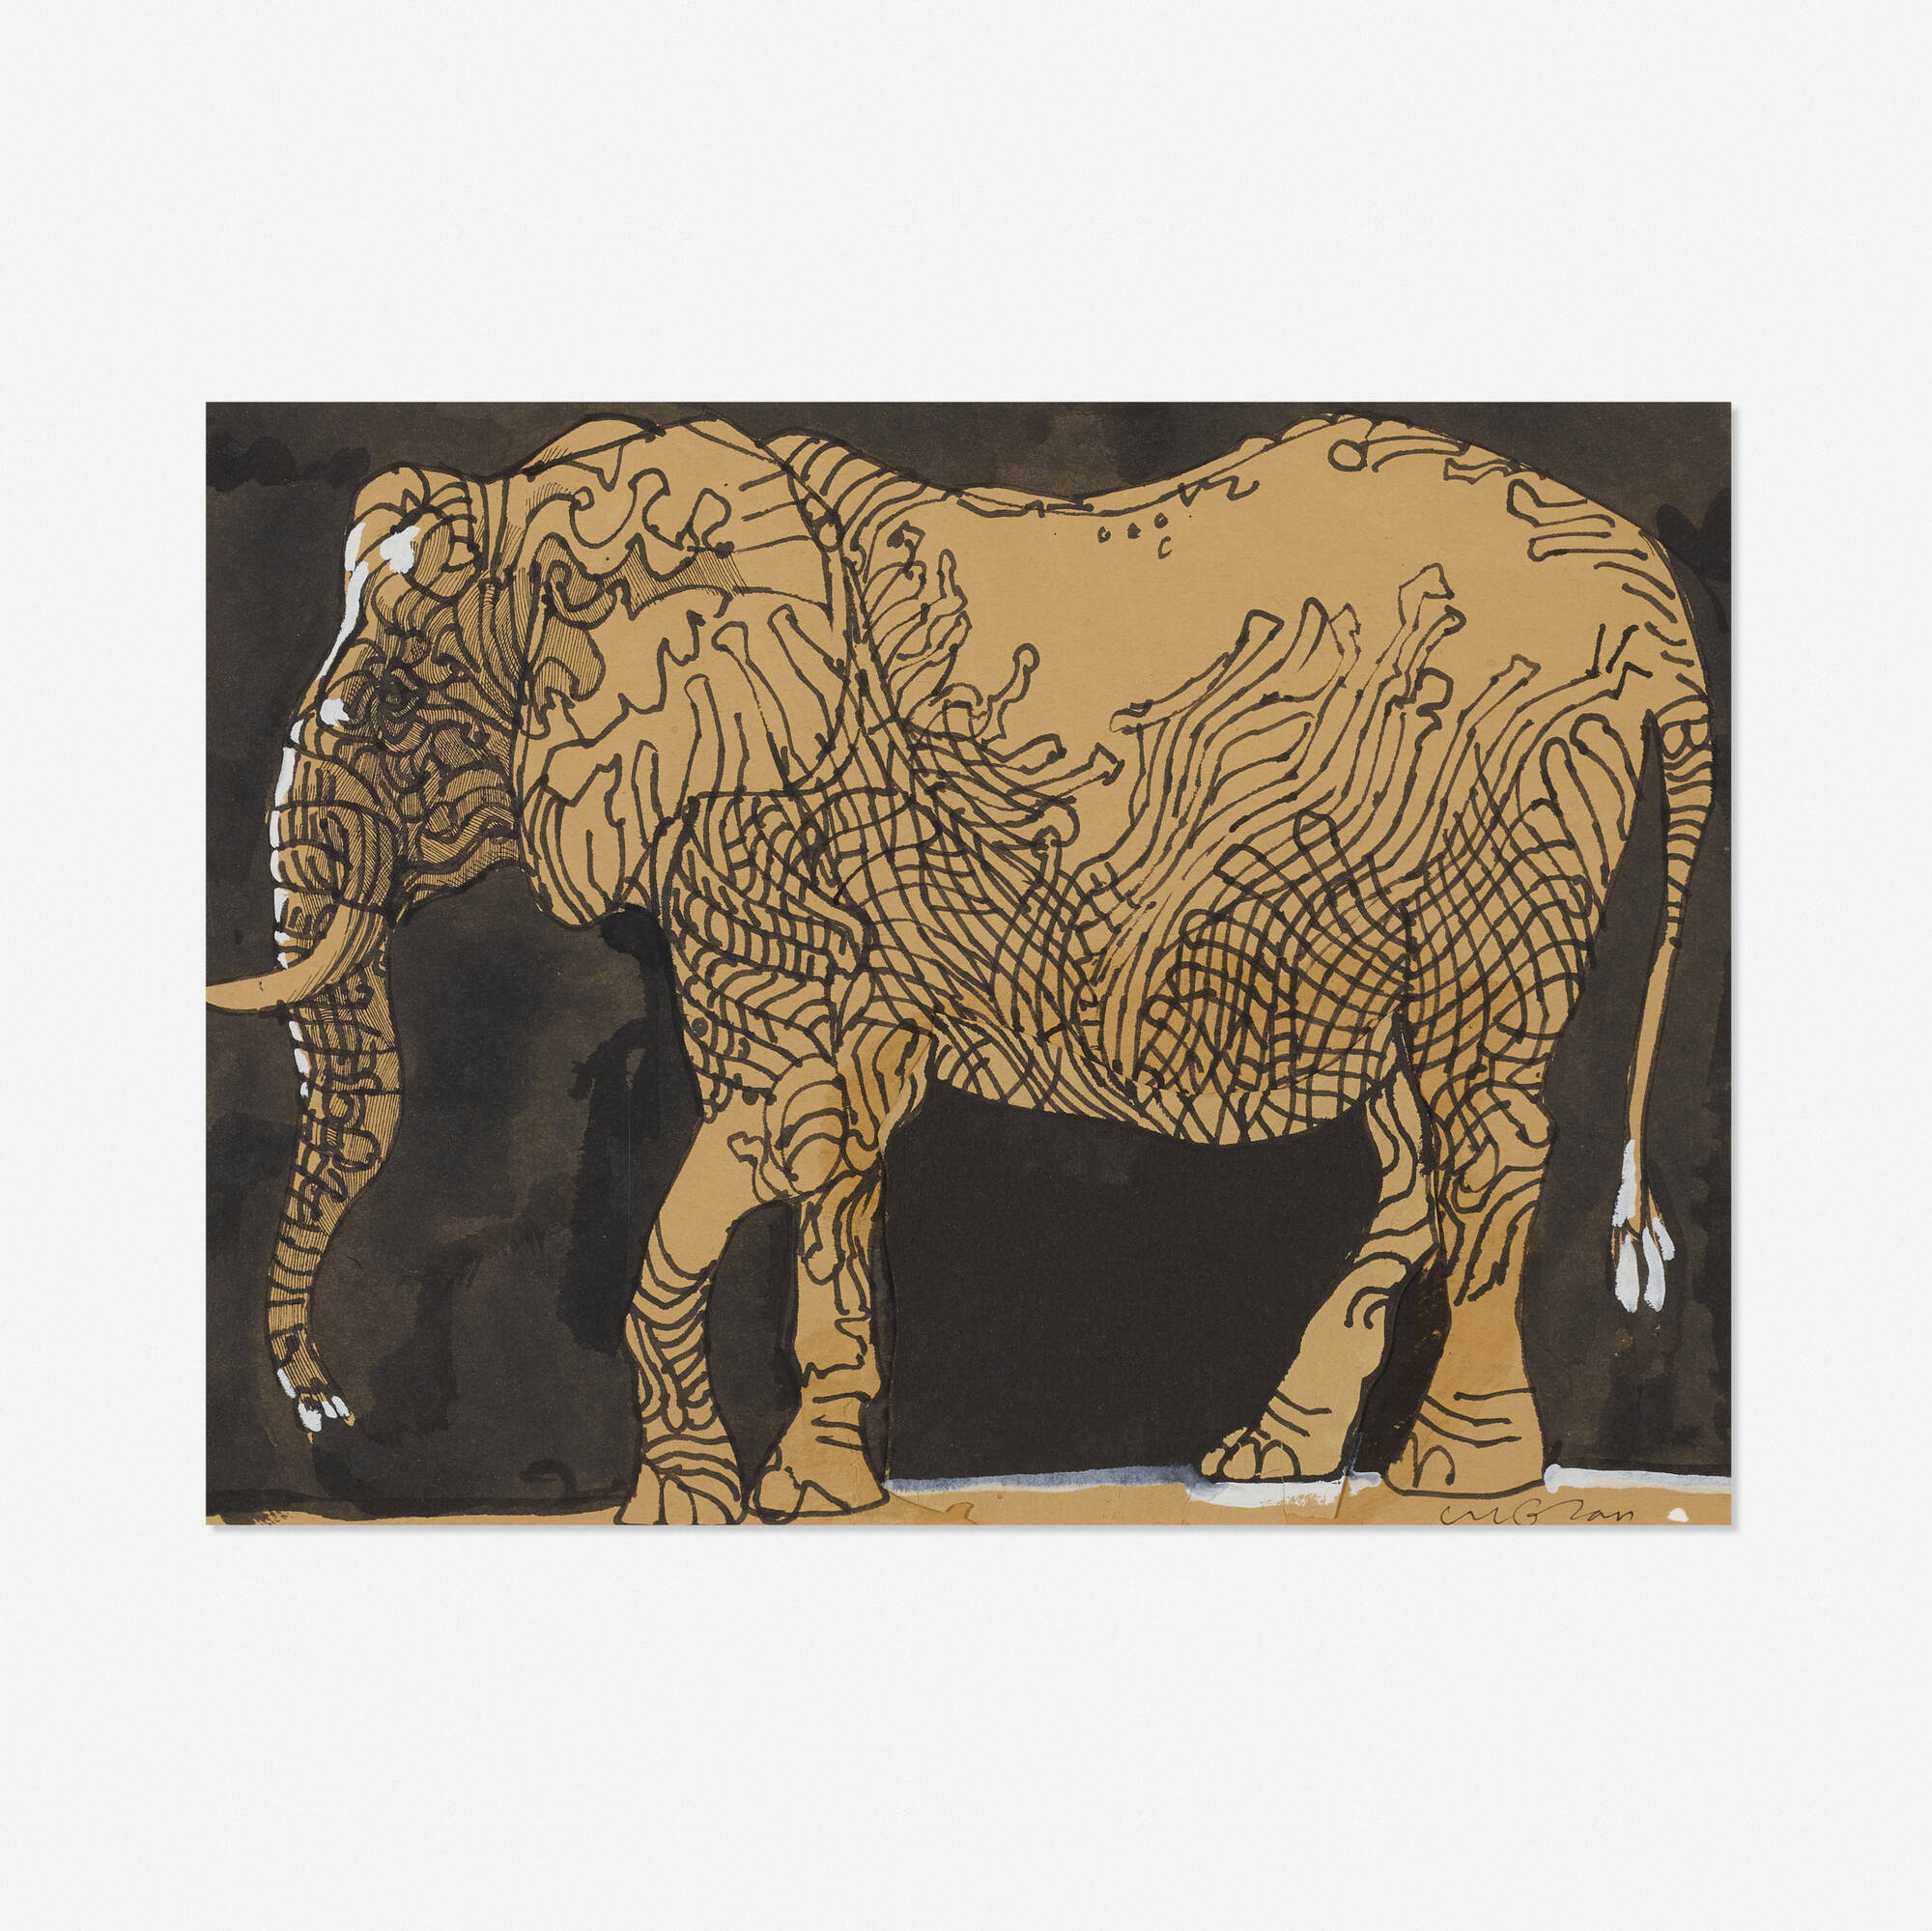 202: MILTON GLASER, Elephant, original art for Cats and Bats and Things ...